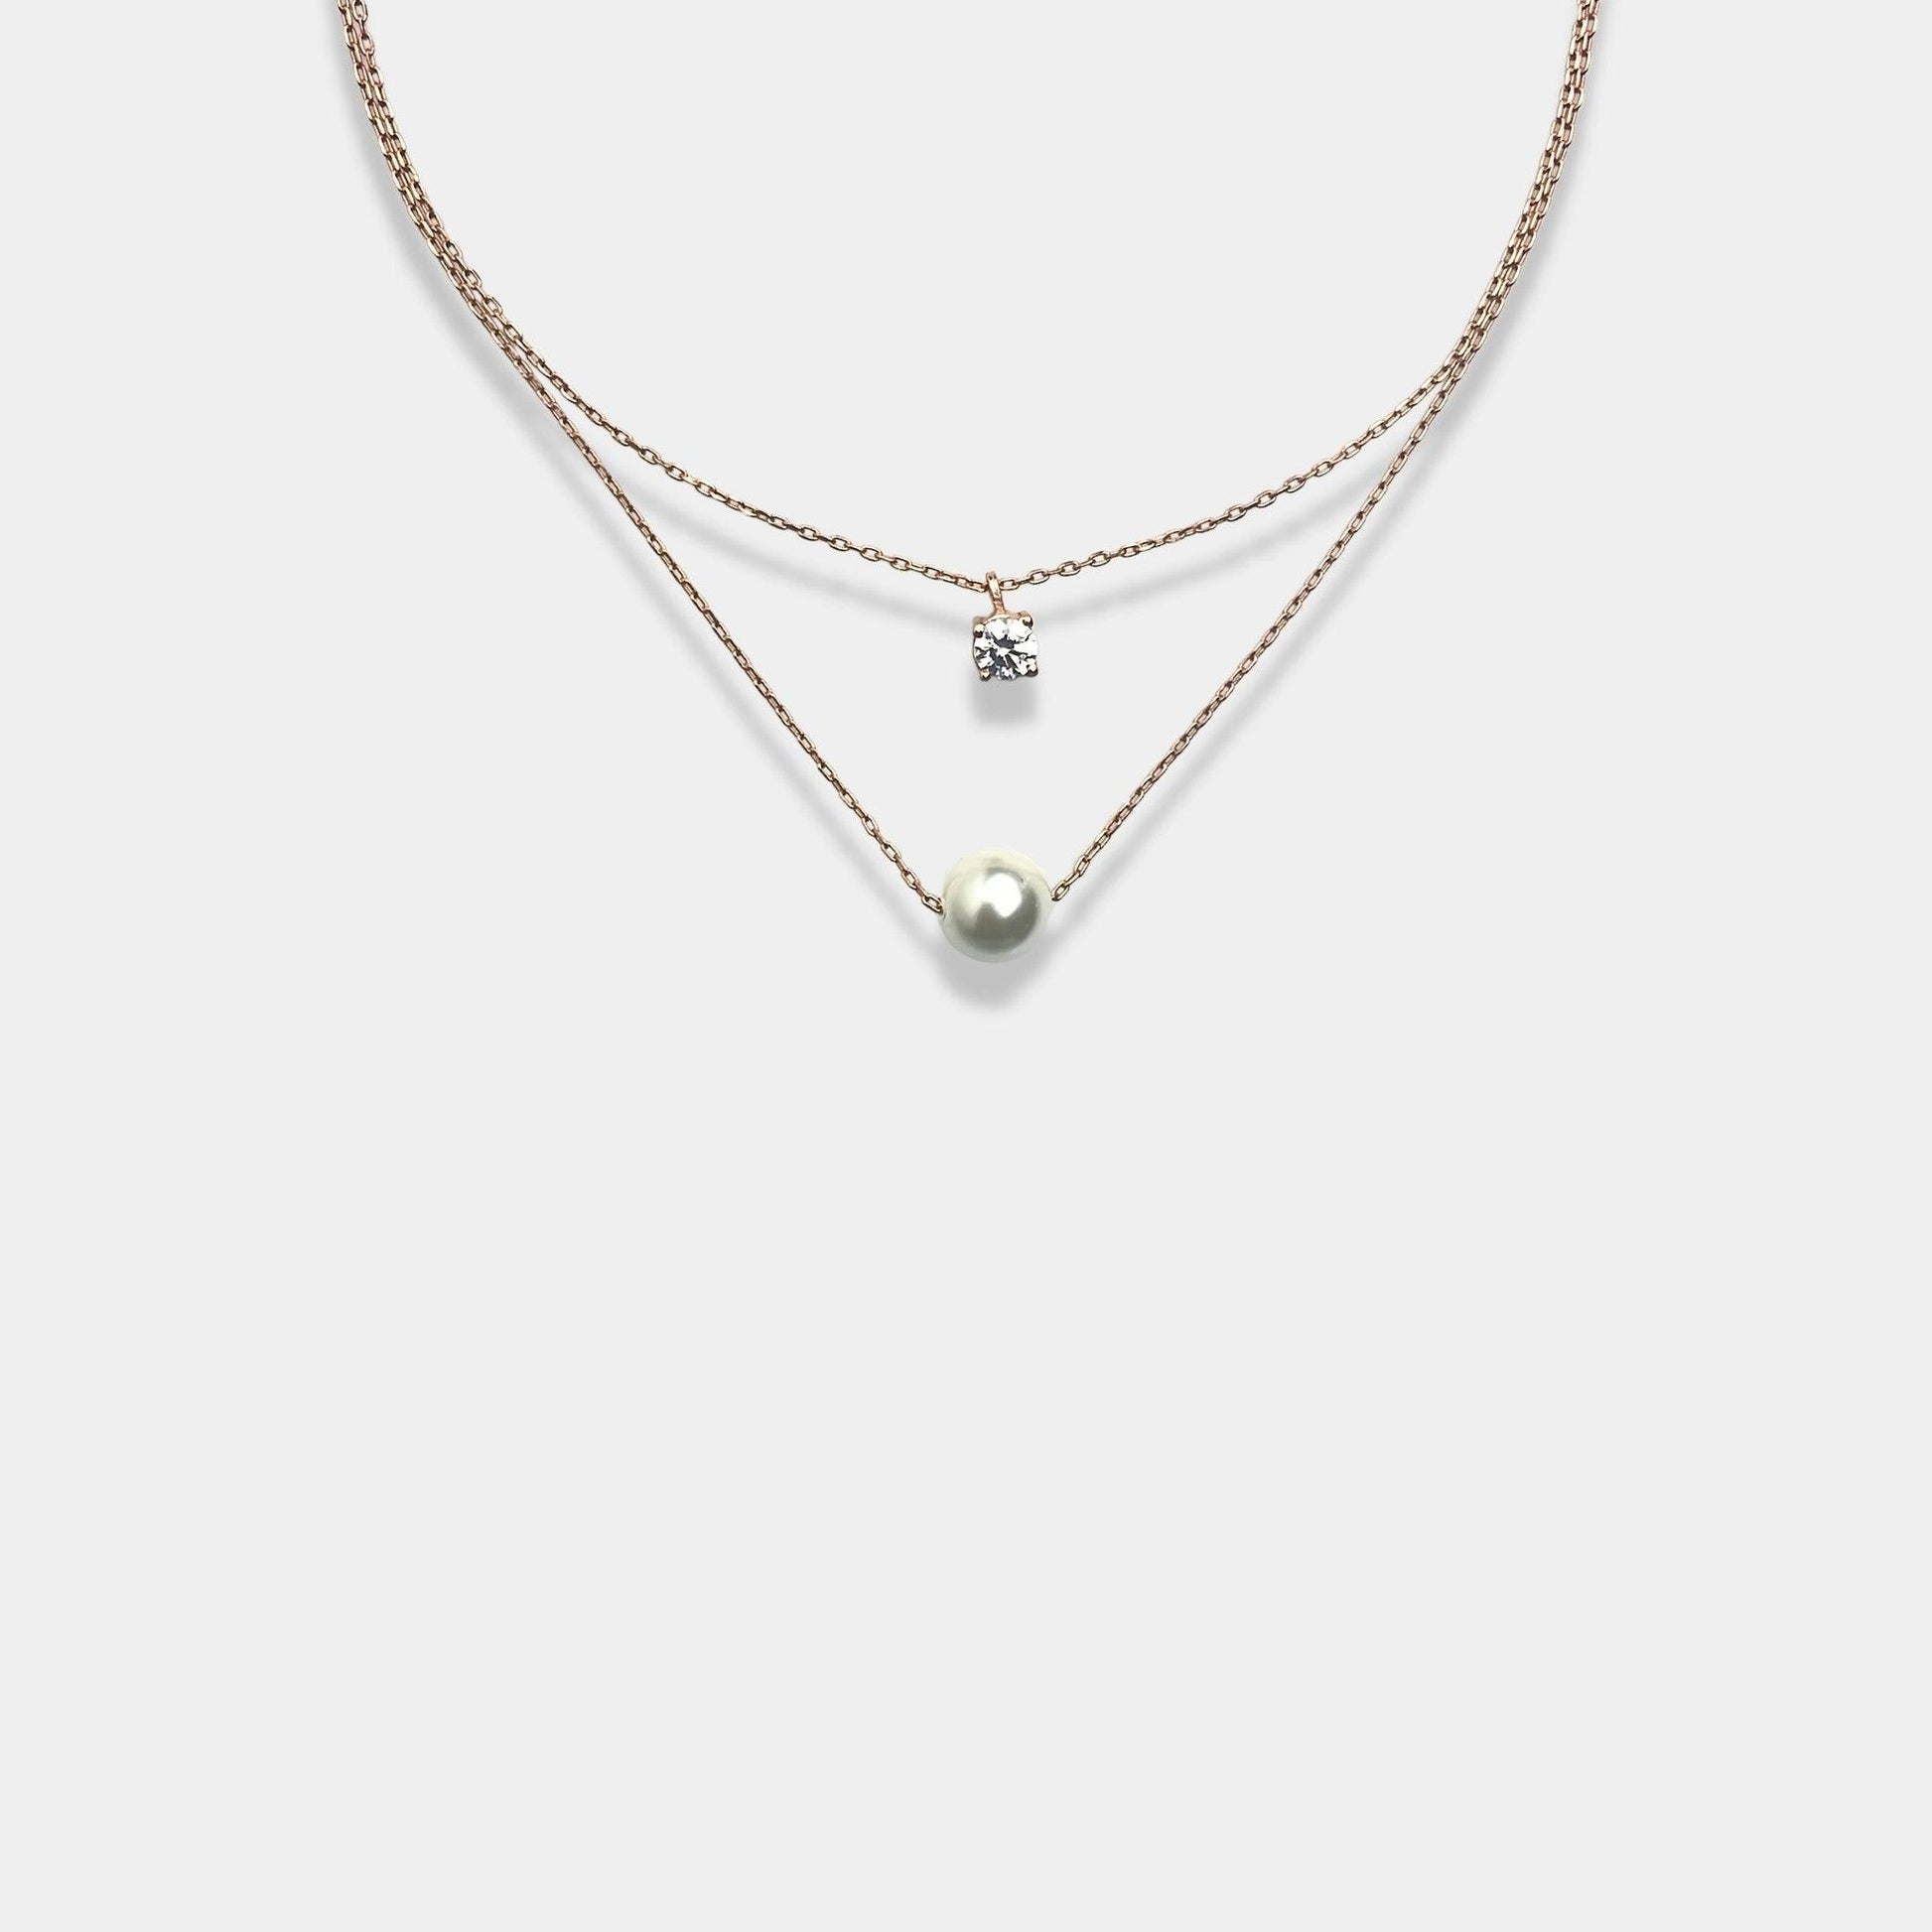 Experience the epitome of luxury with our sterling silver necklace, adorned with a graceful circle pendant and delicately layered chain for a truly enchanting look